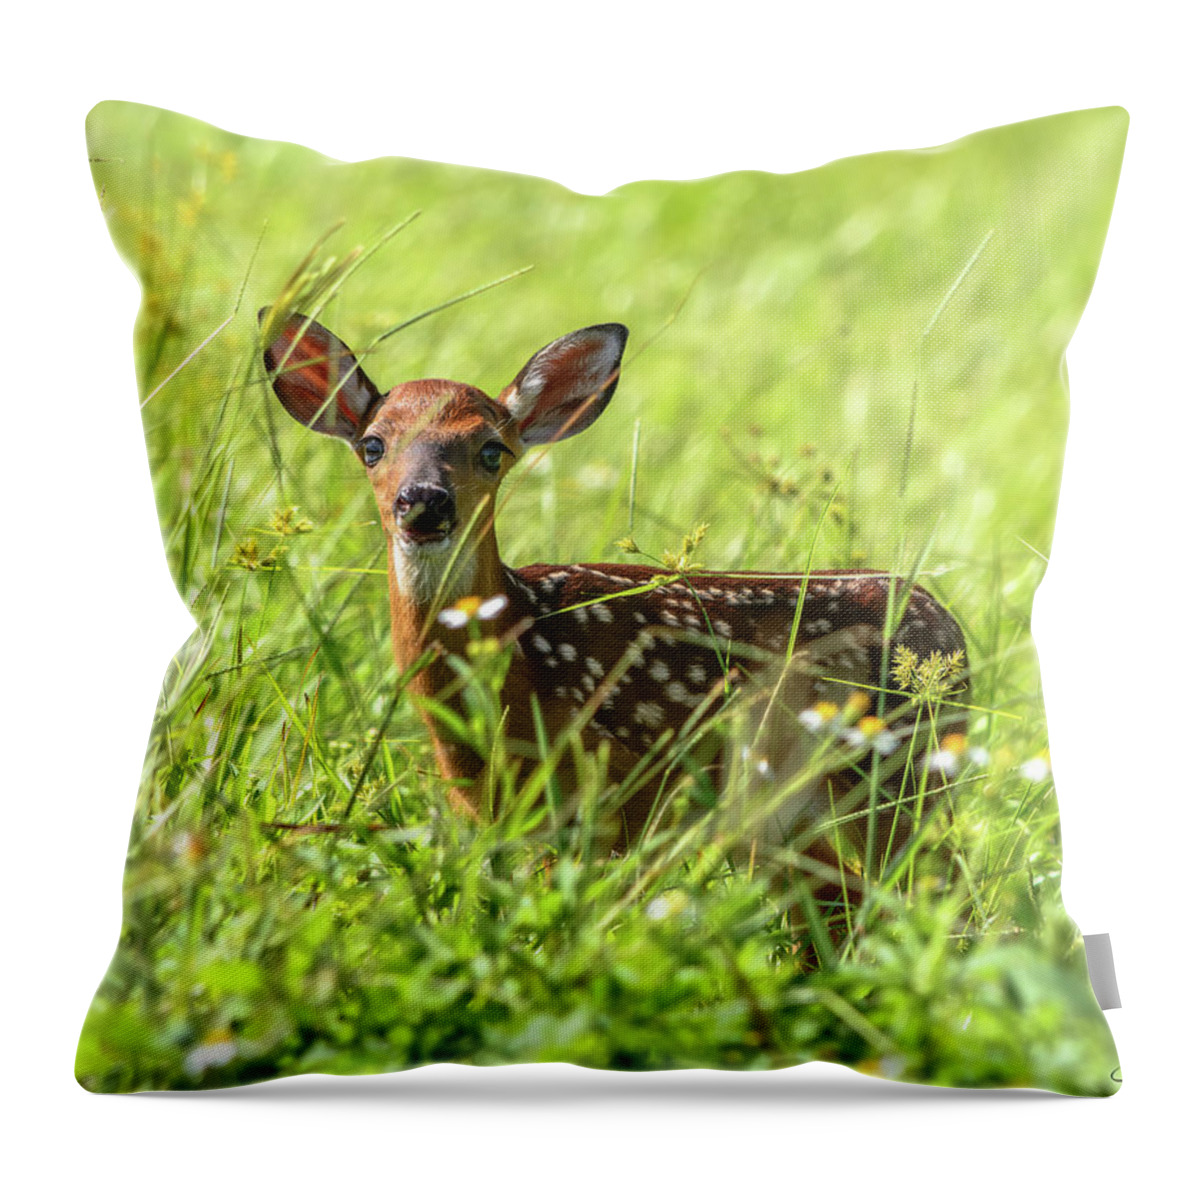 Fawn Throw Pillow featuring the photograph Fawn In Sunny Grass by Steven Sparks